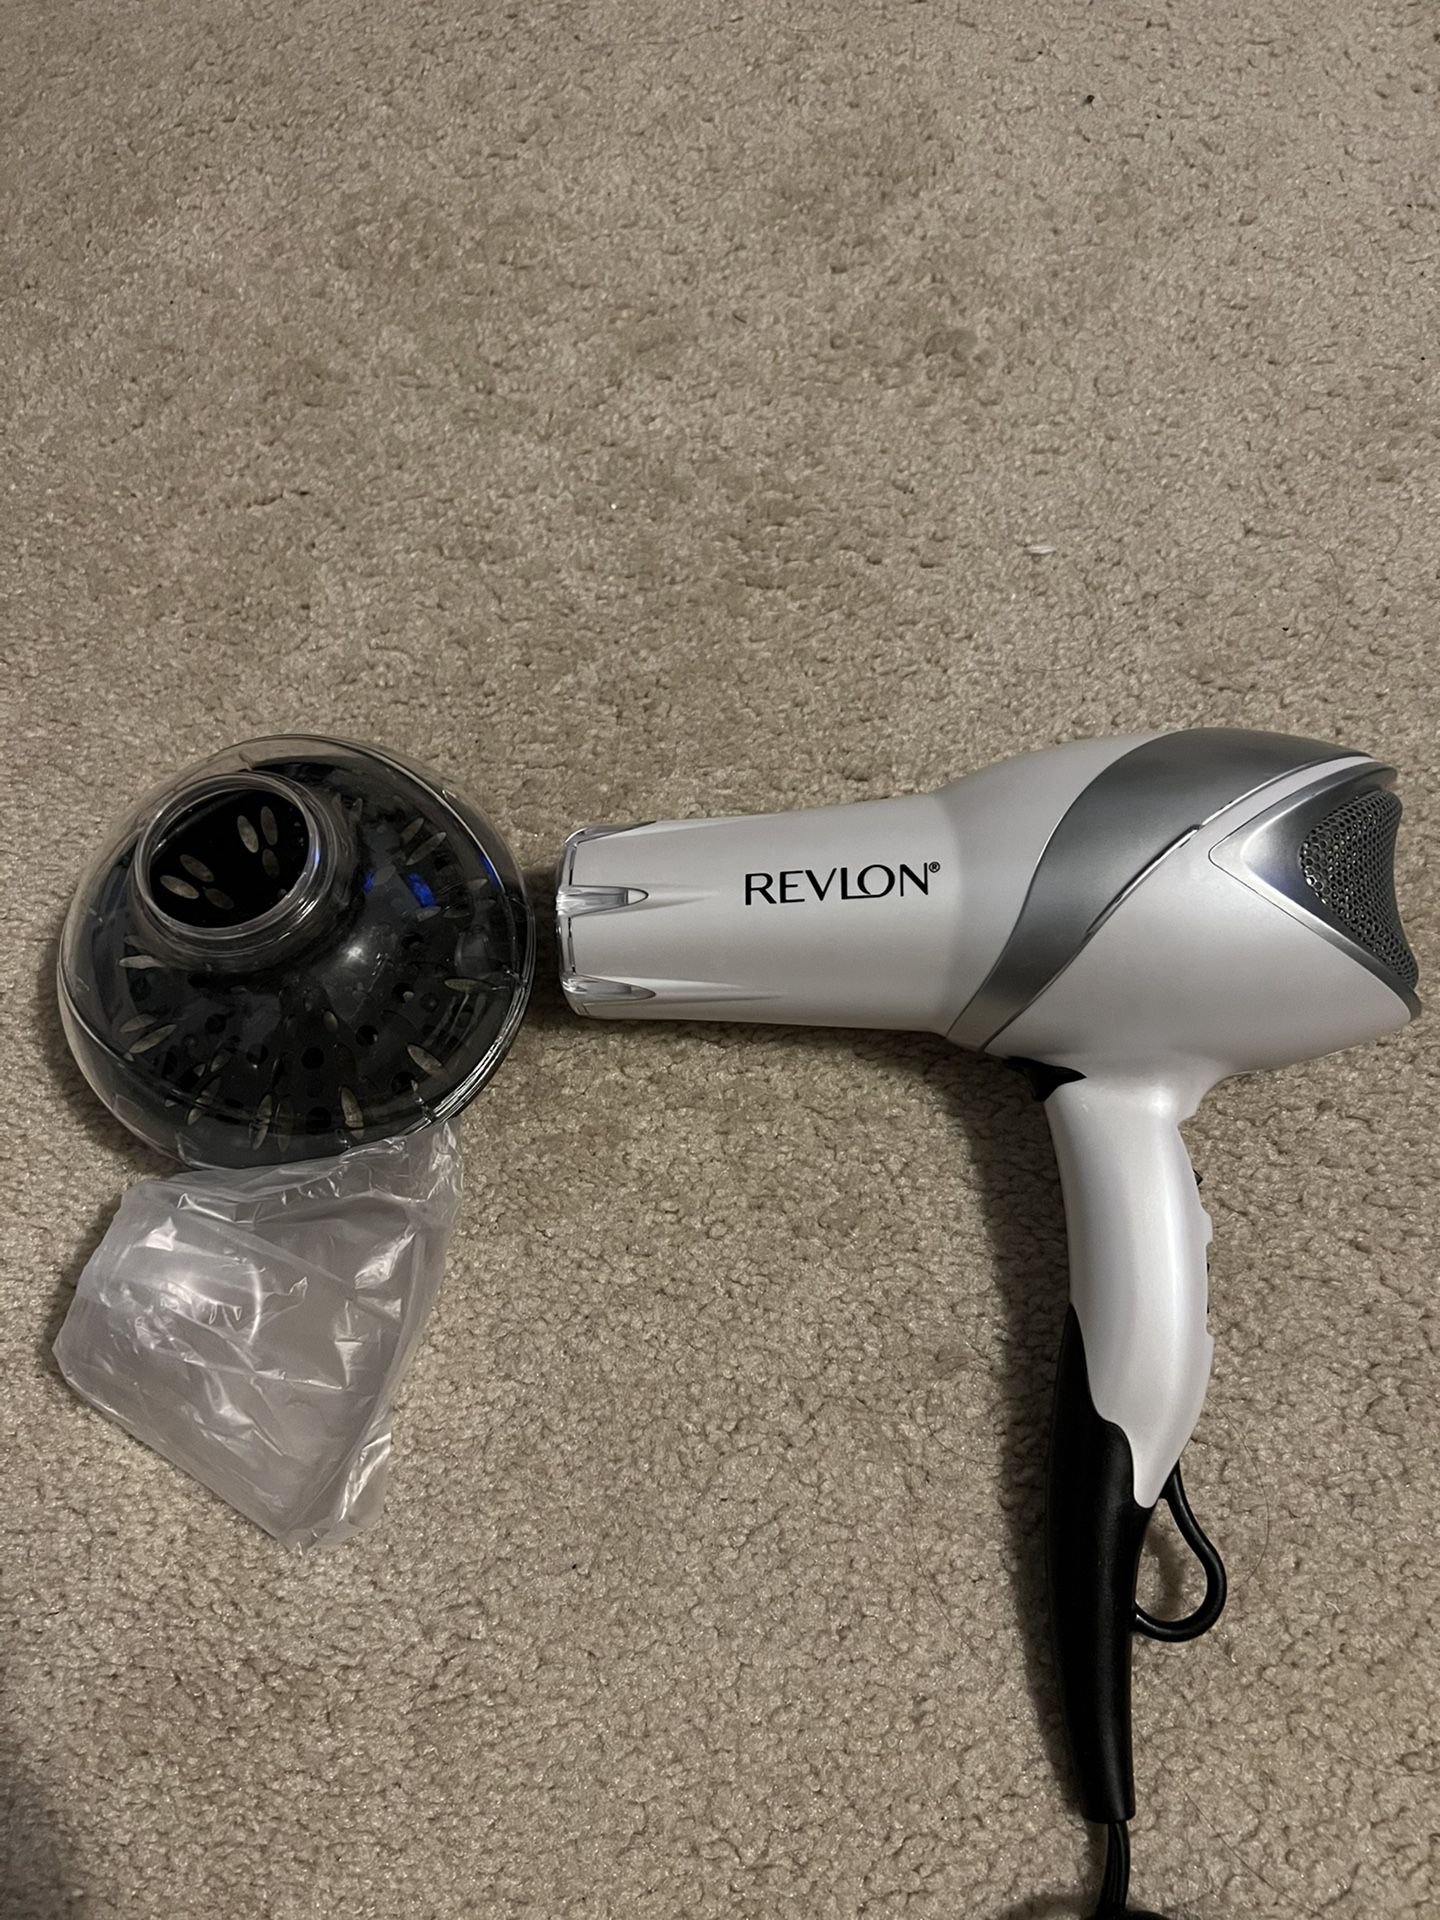 Used - Revlon Hair Dryer With Styling Nozzle And Diffuser Nozzle